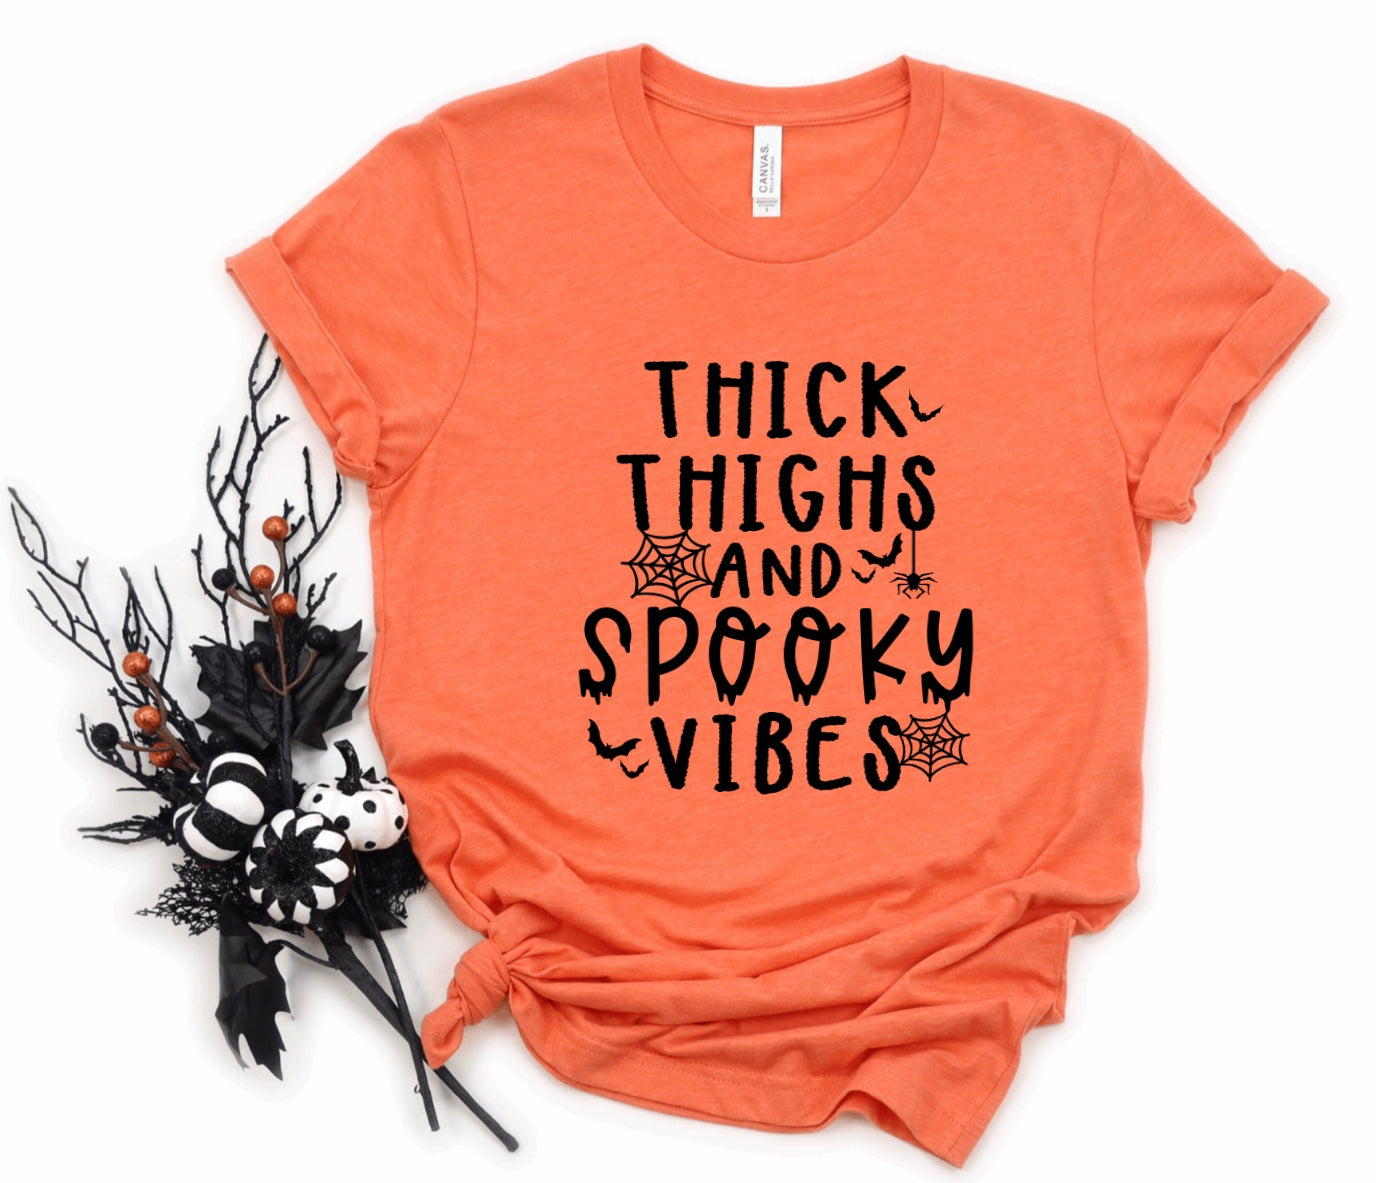 Thick thighs and spooky vibes t-shirt 